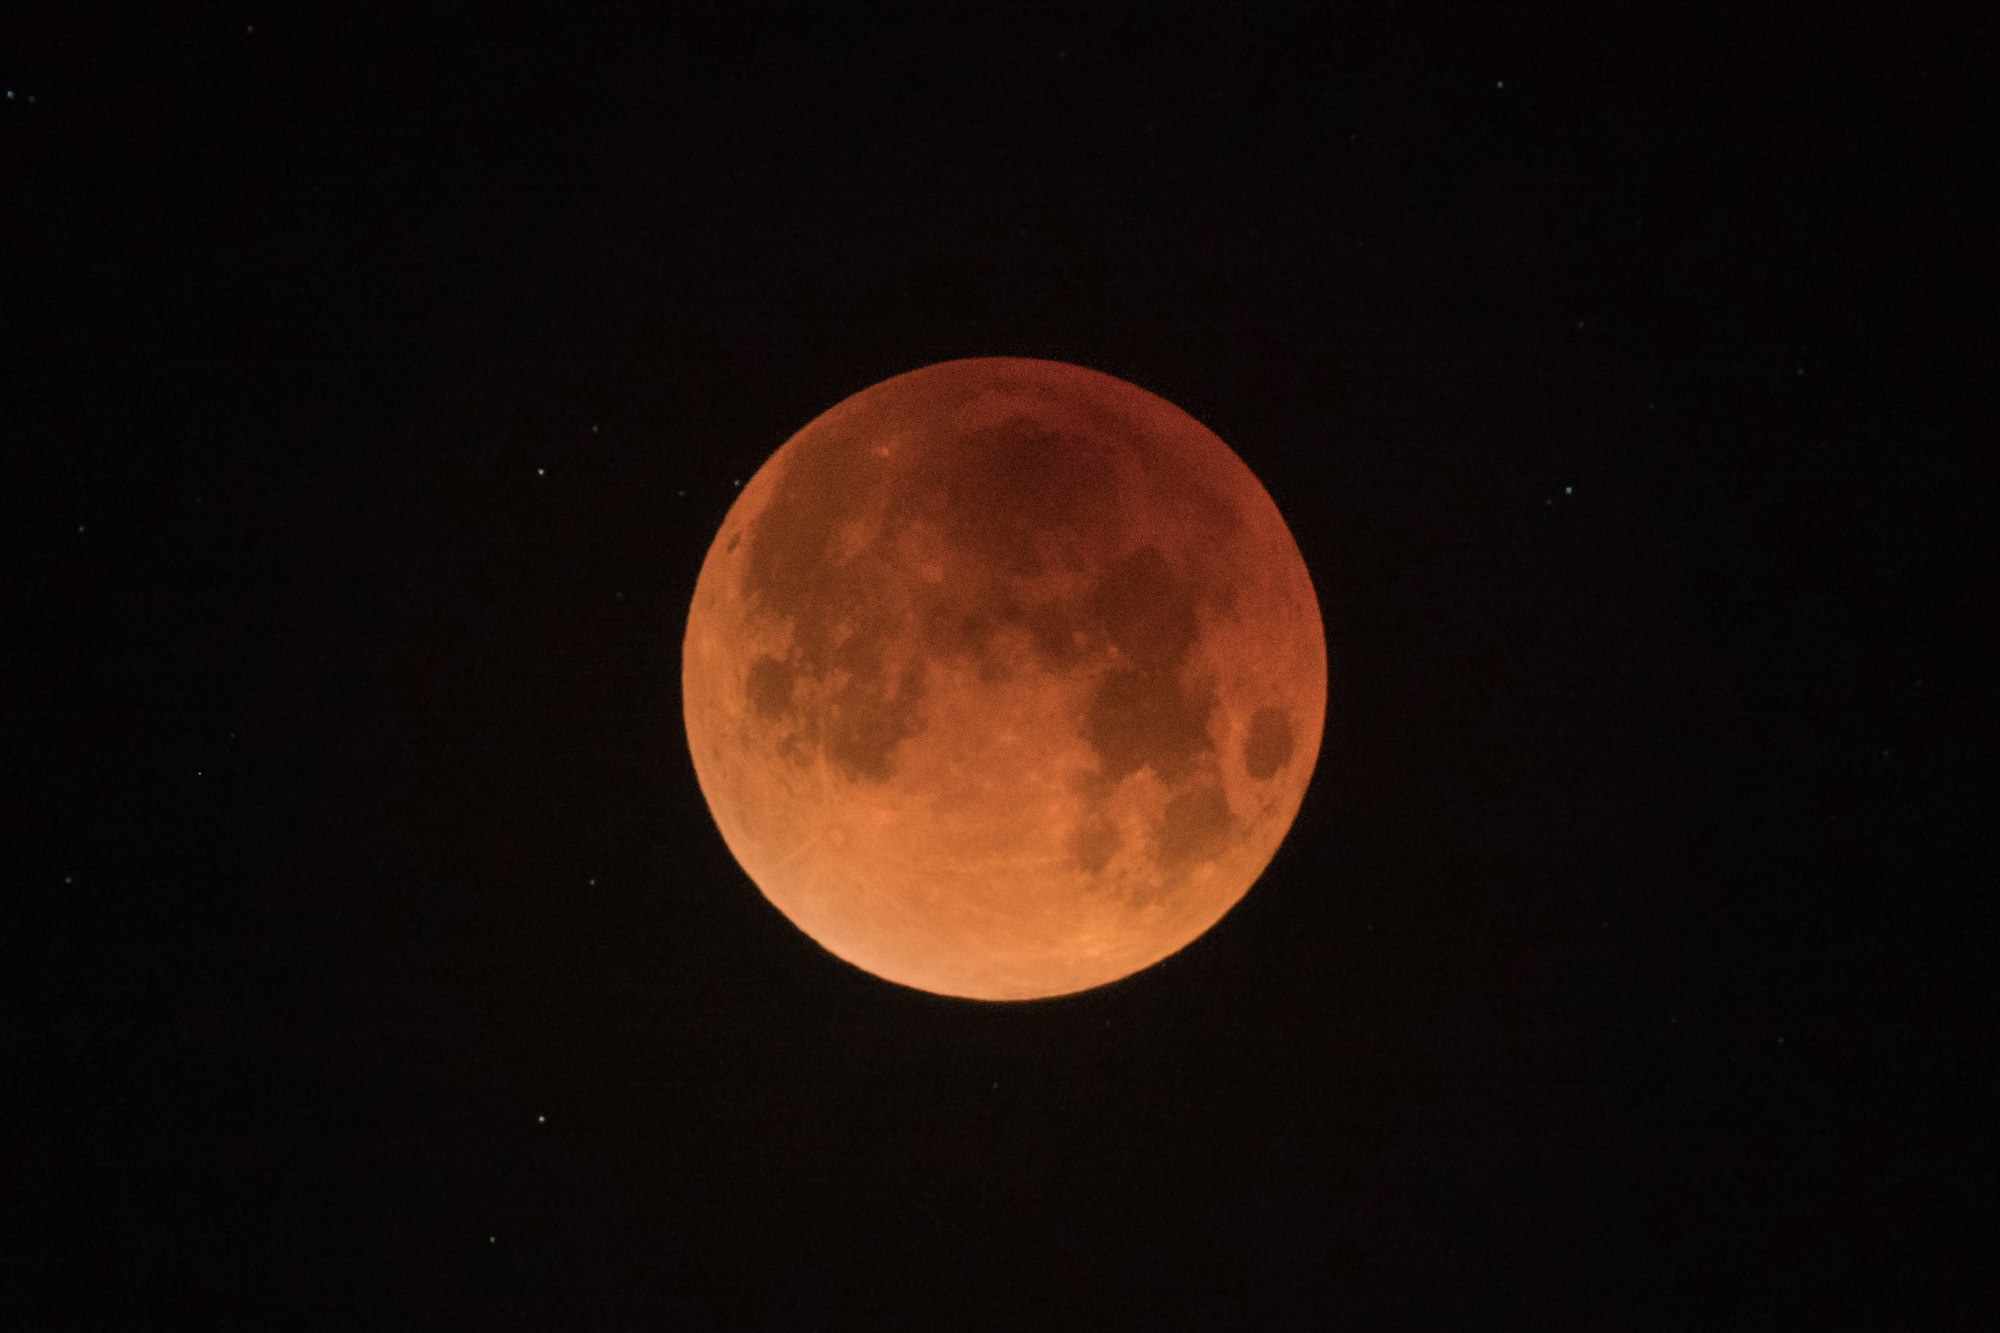 Here is a shot of the lunar eclipse. It was taken in Napa, California at about 0545. I was fortunate enough to be close by and not get shutdown due to in-climate weather as a bunch of my friends did. The shot was fairly easy to take. The hardest part about acquiring a photo like this is the focus. Even with the best optics you still have to worry about the atmospheric distortion, which is caused when the moon gets close to the horizon. I hope you enjoy. I’m on IG @bryangoffphoto Stop by and say hi!